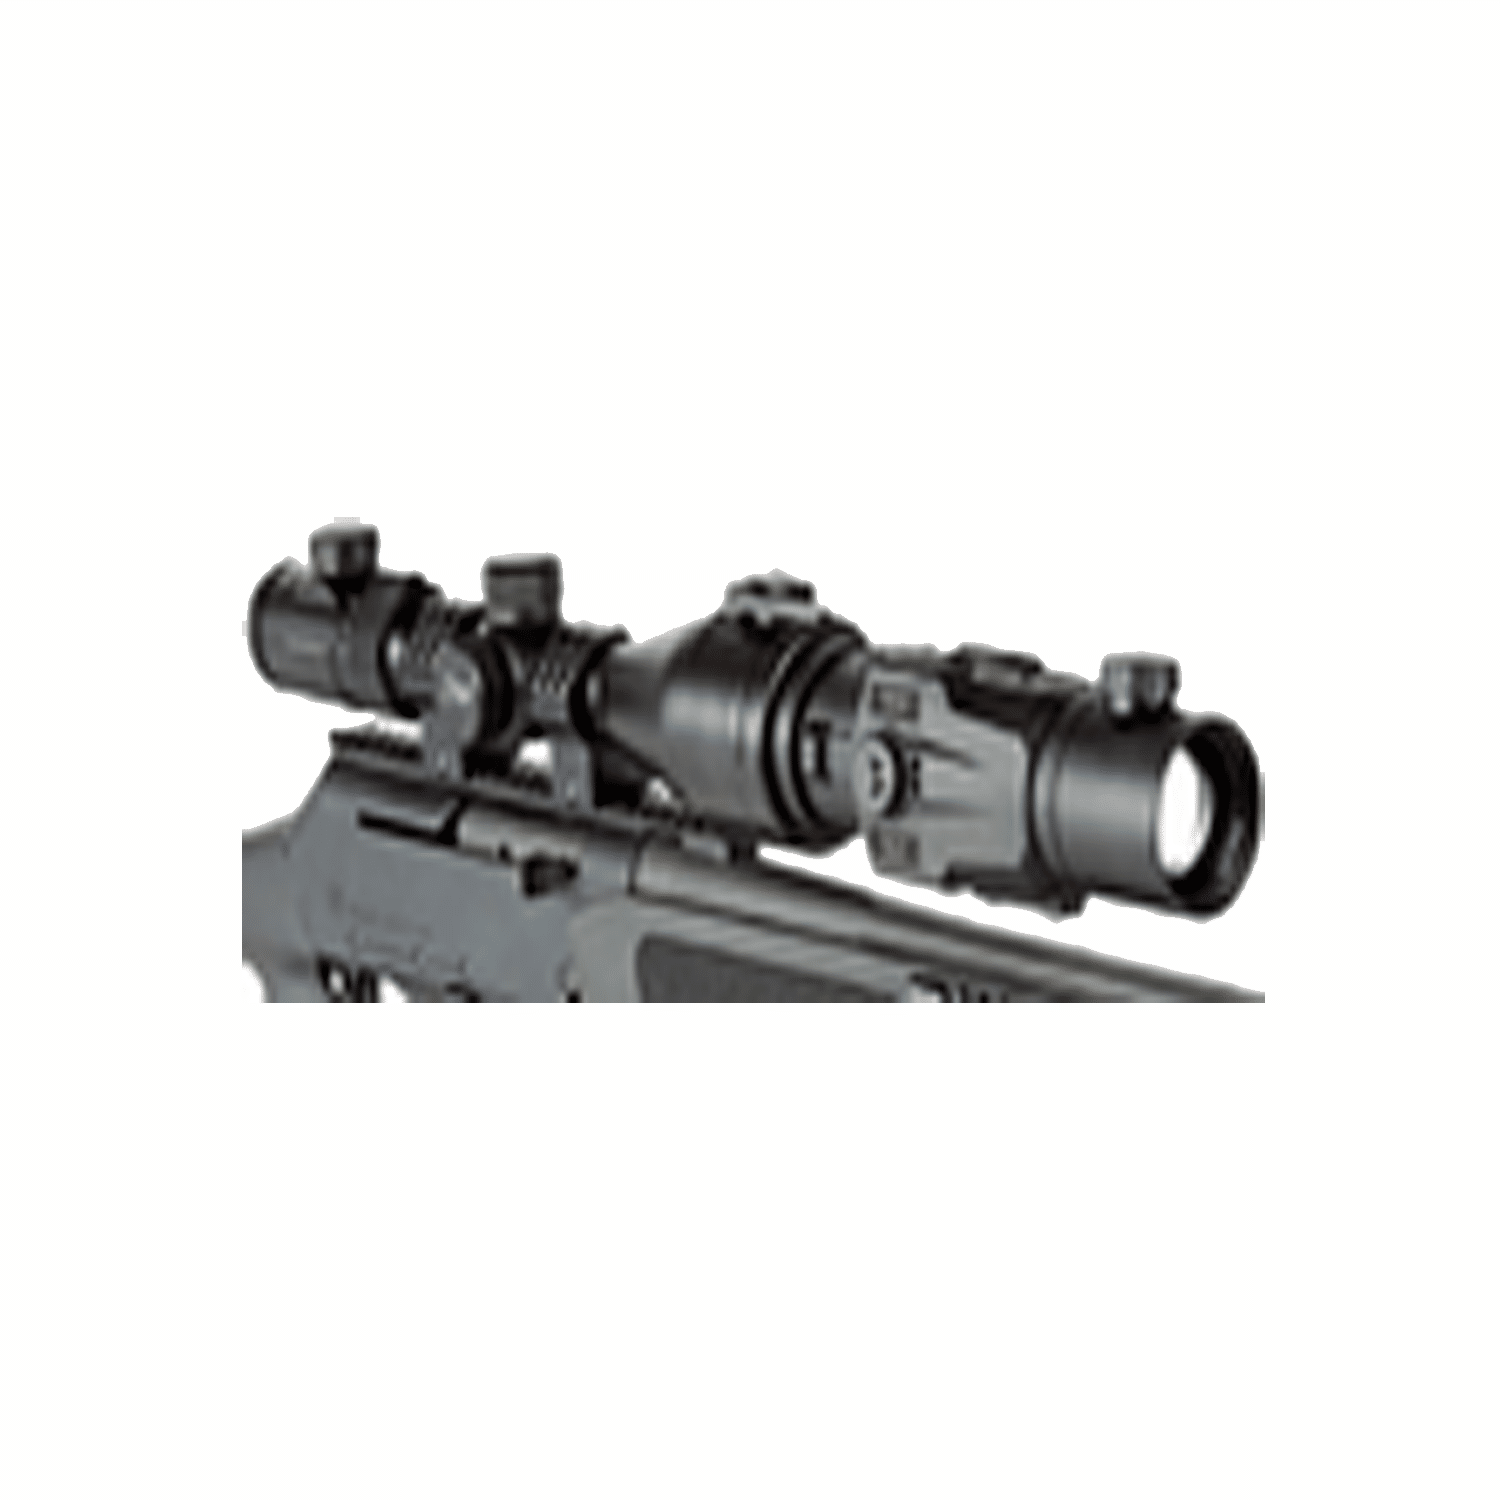 BERING OPTICS SUPER YOTER-C THERMAL CLIP-ON SCOPE 640X480/12UM 50HZ 50MM -  BE46150 - Boars and Yotes - Southern Precision Outdoors